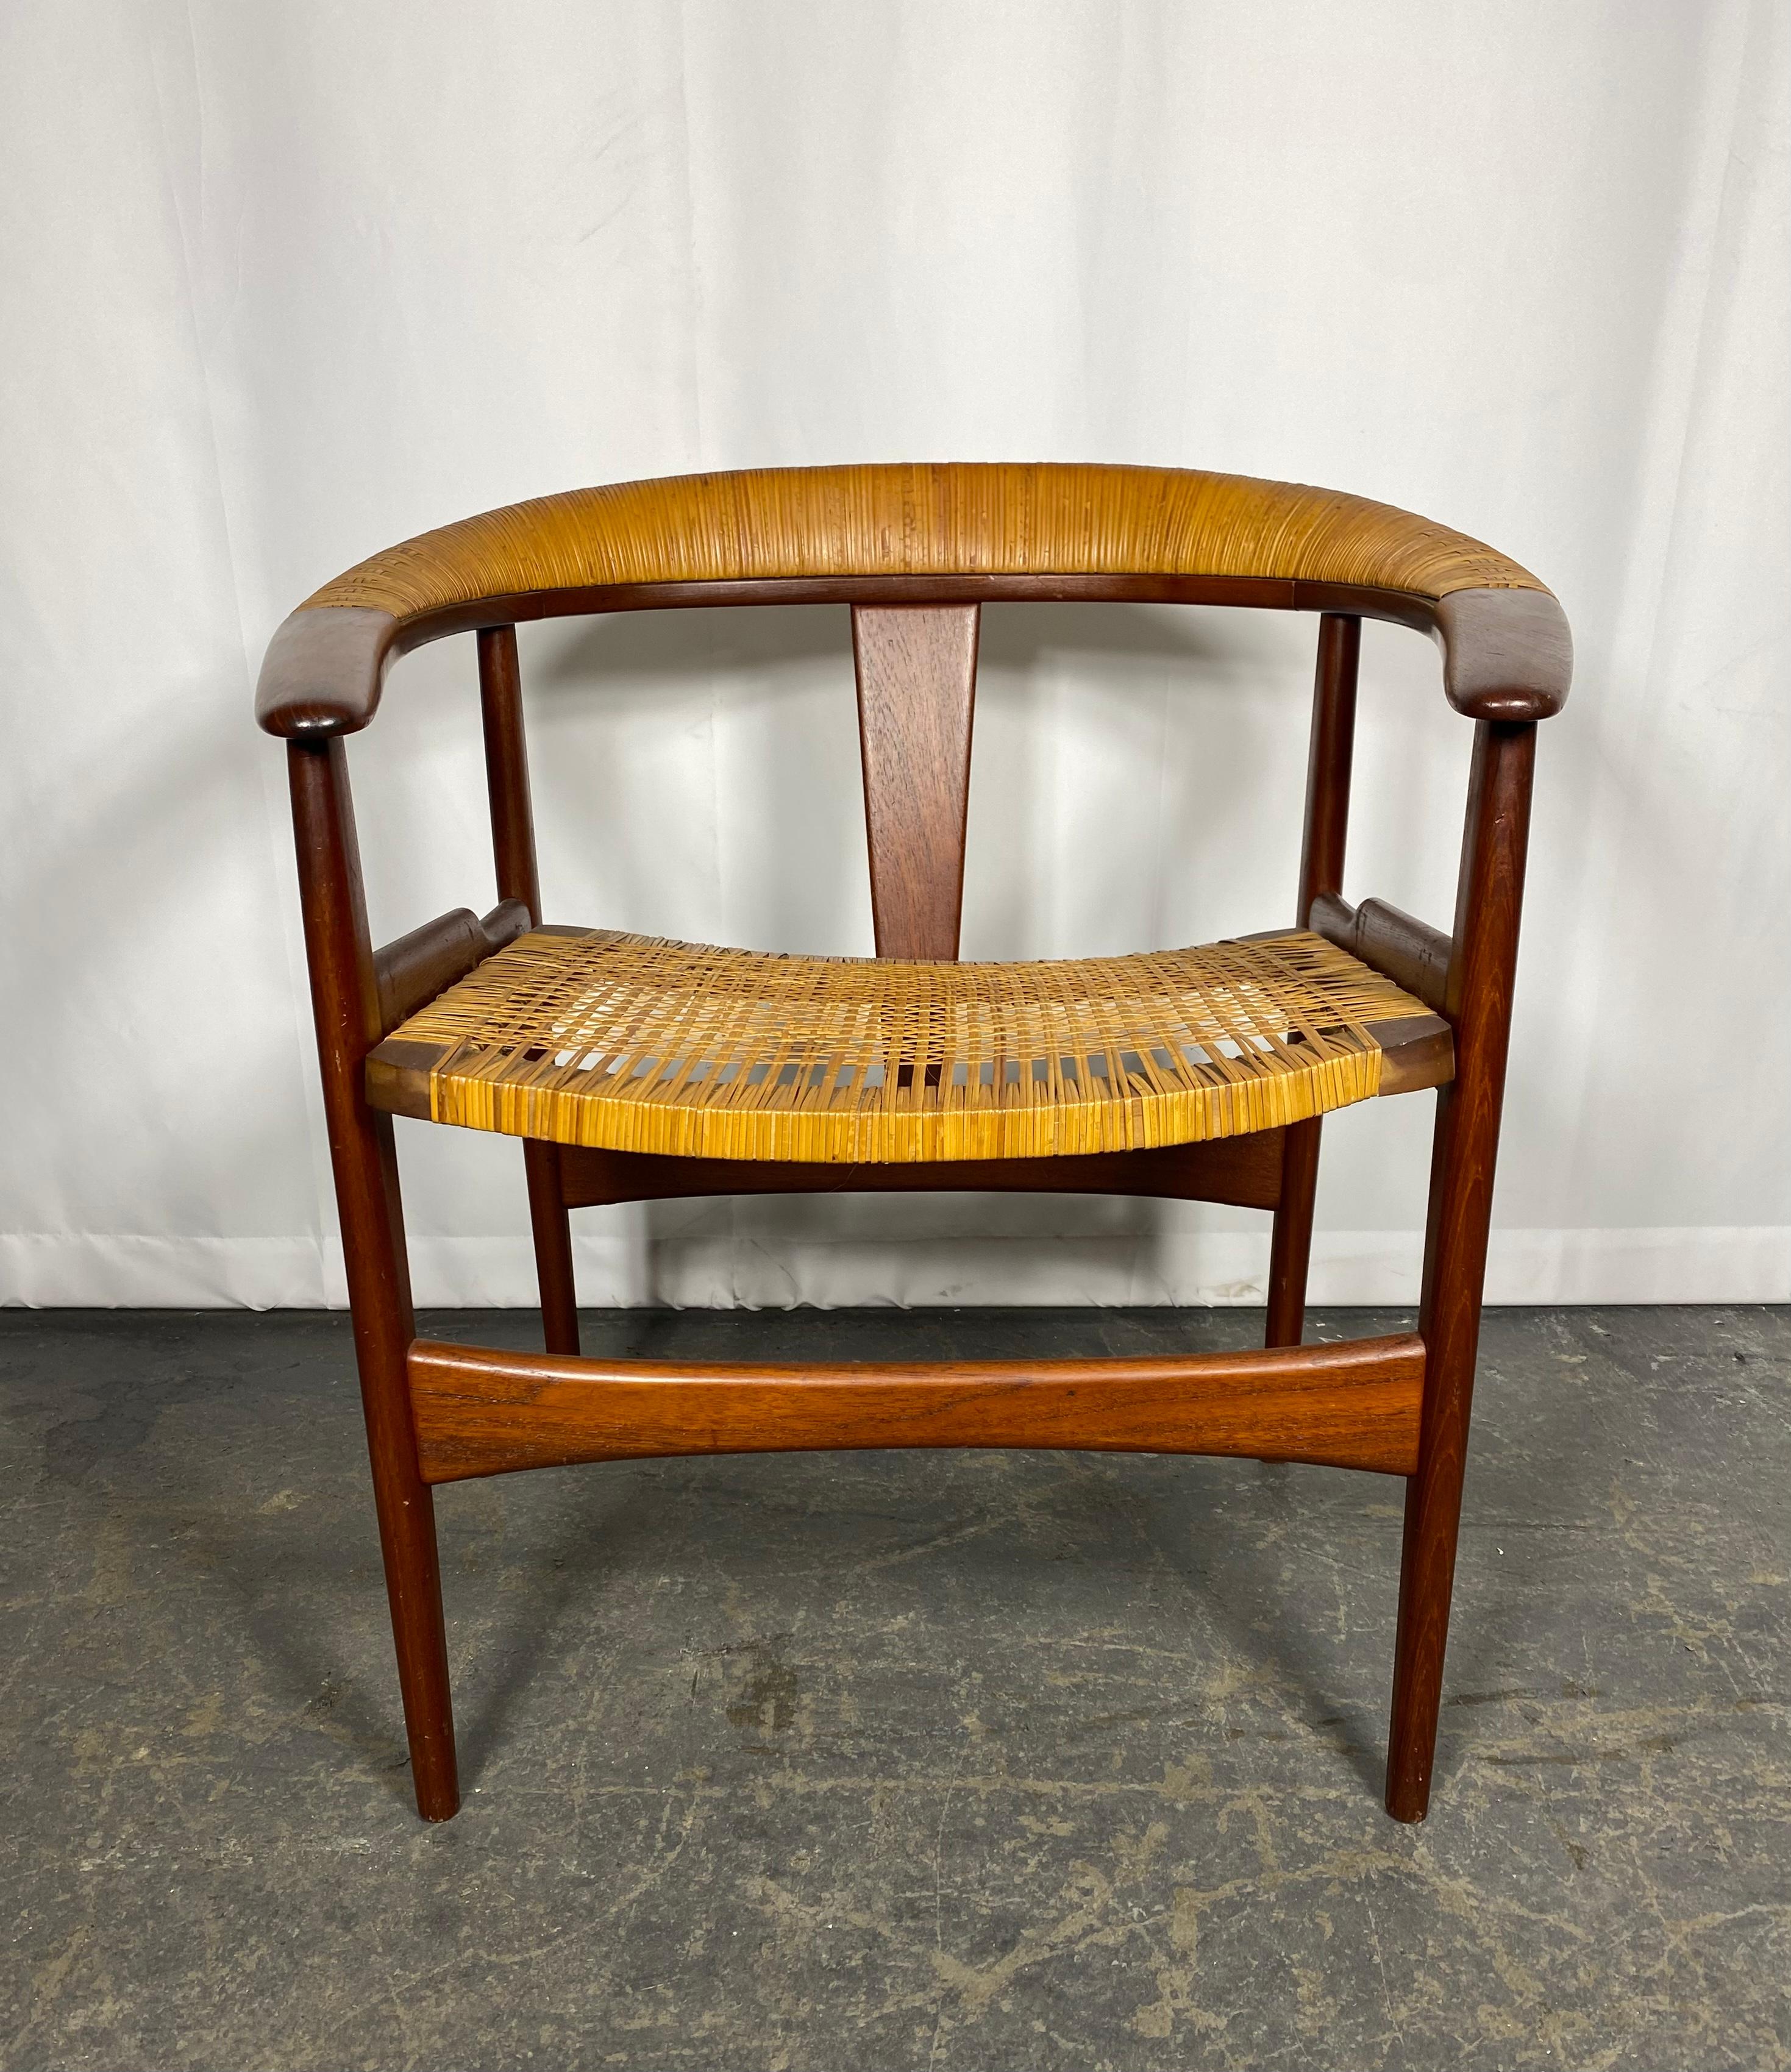 RARE ARNE HOVMAND-OLSEN barrel back chair teak / wicker, MODEL 171..Stunning design, Amazing patina, color , finish.  Extremely comfortable,,side dowels have been removed,, screws exposed,(see photo).Hand delivery avail to New York City or anywhere